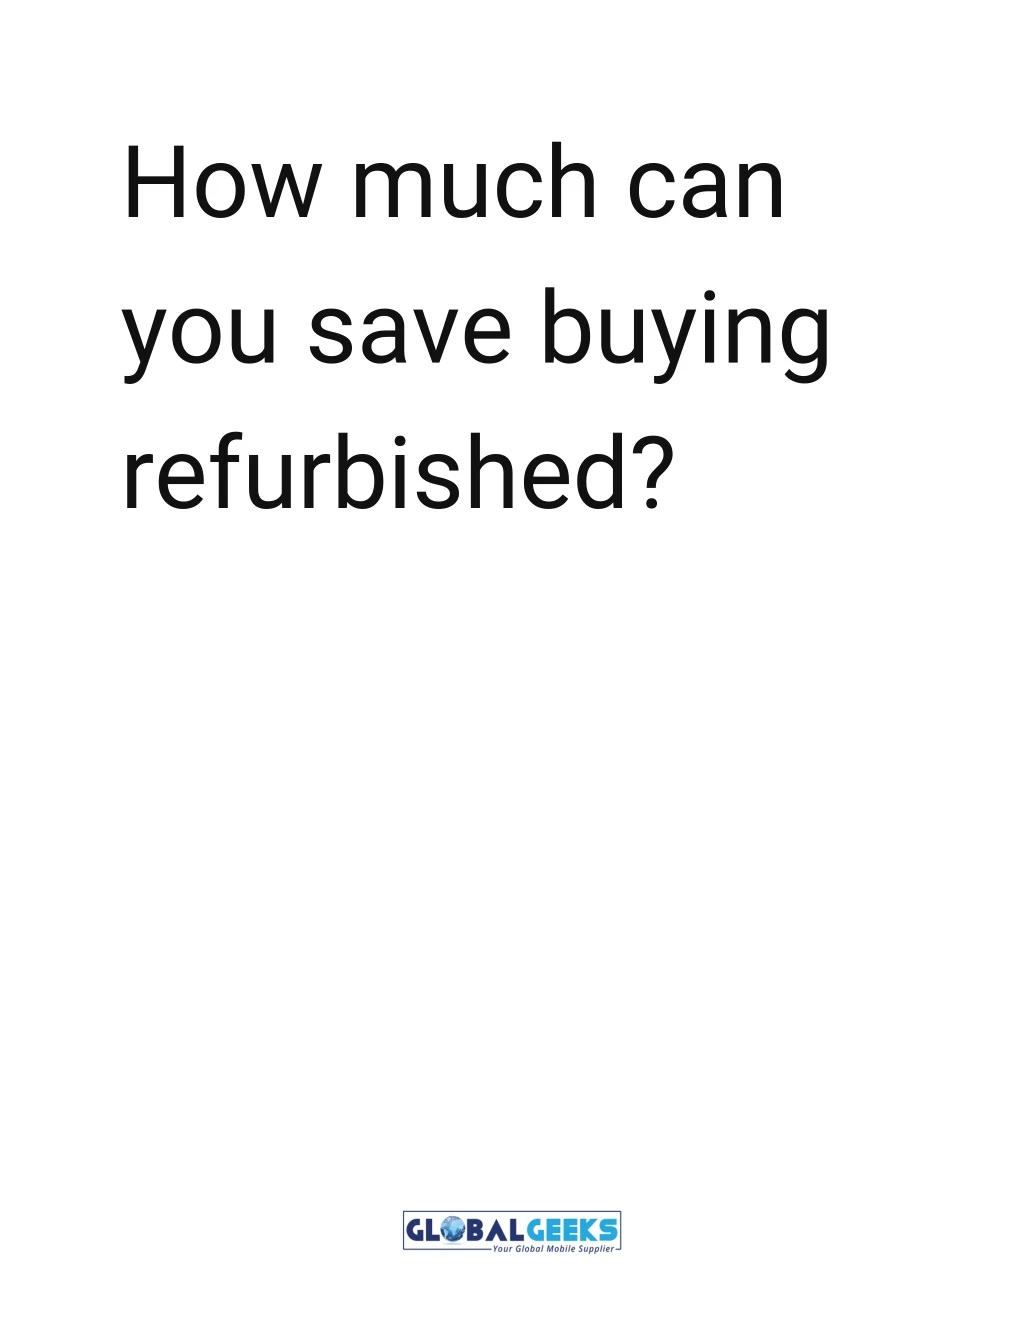 how much can you save buying refurbished